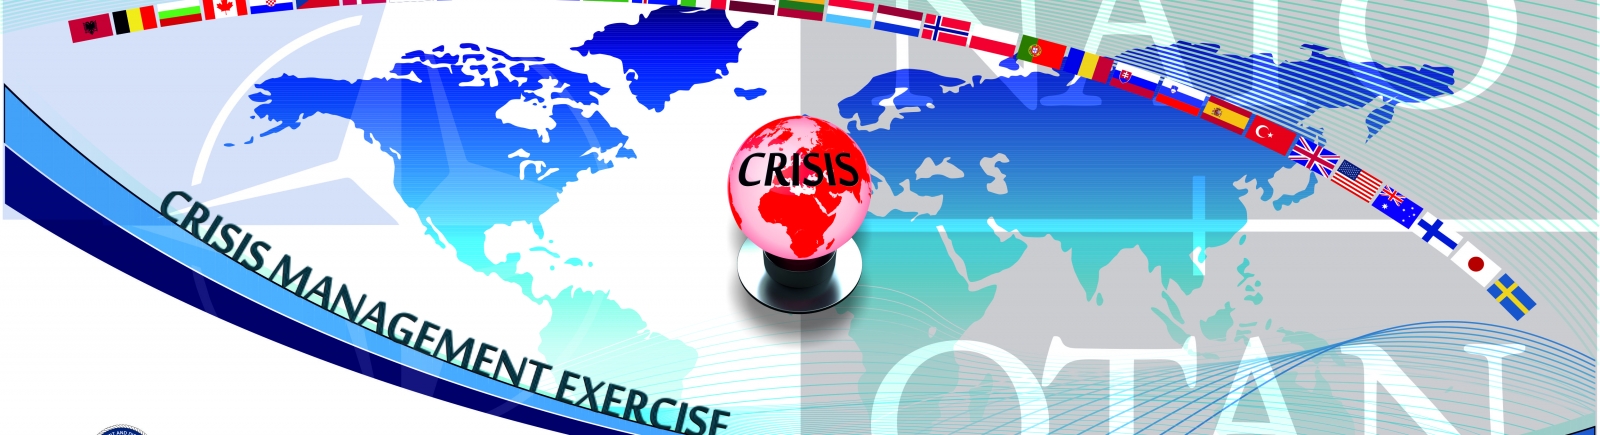 Crisis Response Operations Planners Professional Development Hybrid (residentiаl and on-line) Course - (NATO APPROVED; NATO ETOC Code: JPL-OP-31878)